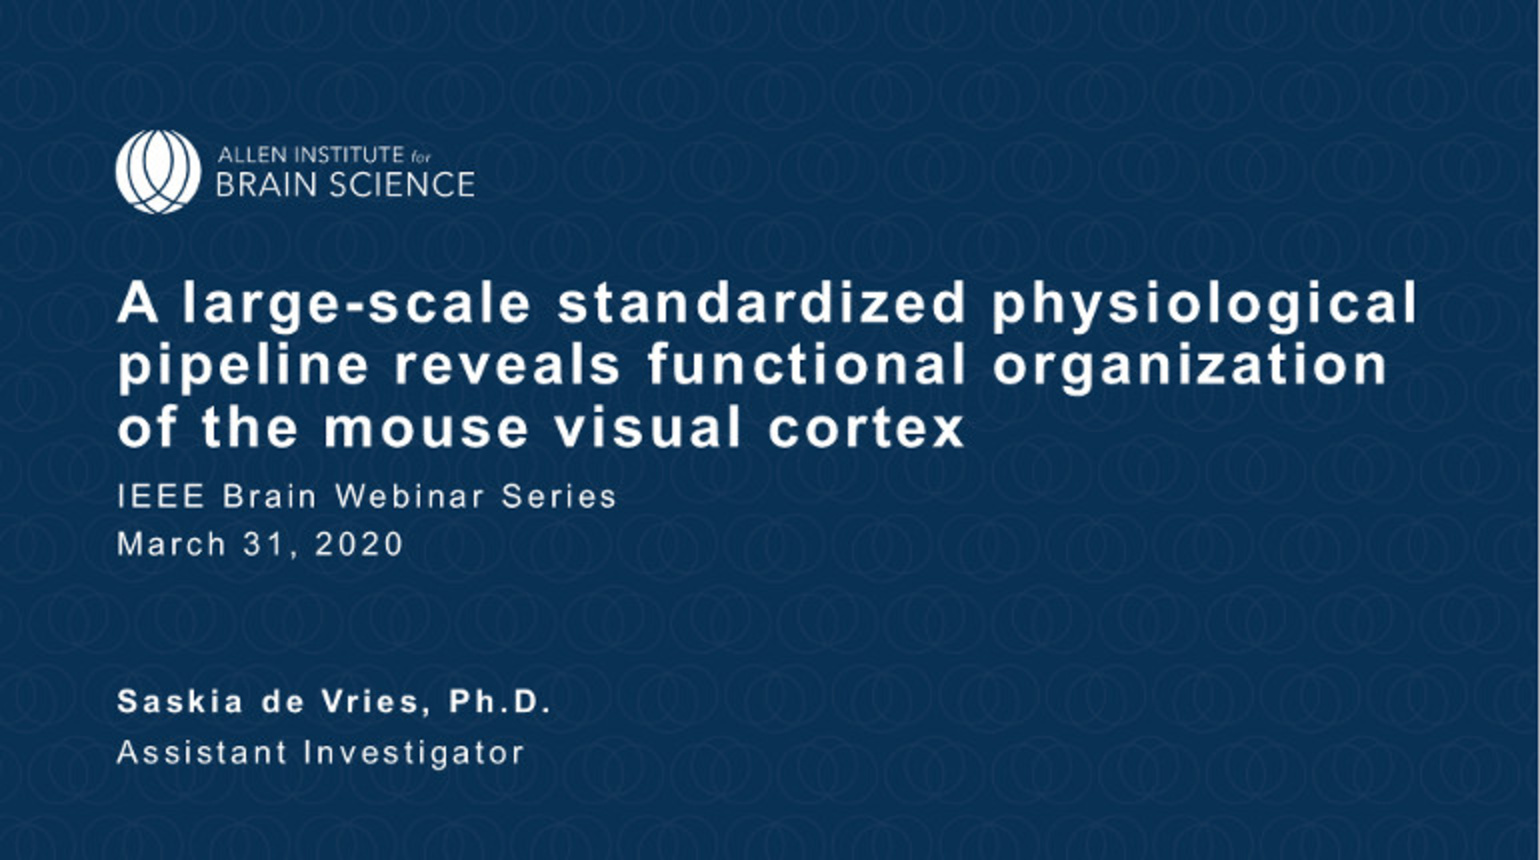 IEEE Brain: A Large-scale Standardized Physiological Pipeline Reveals Functional Organization of the Mouse Visual Cortex